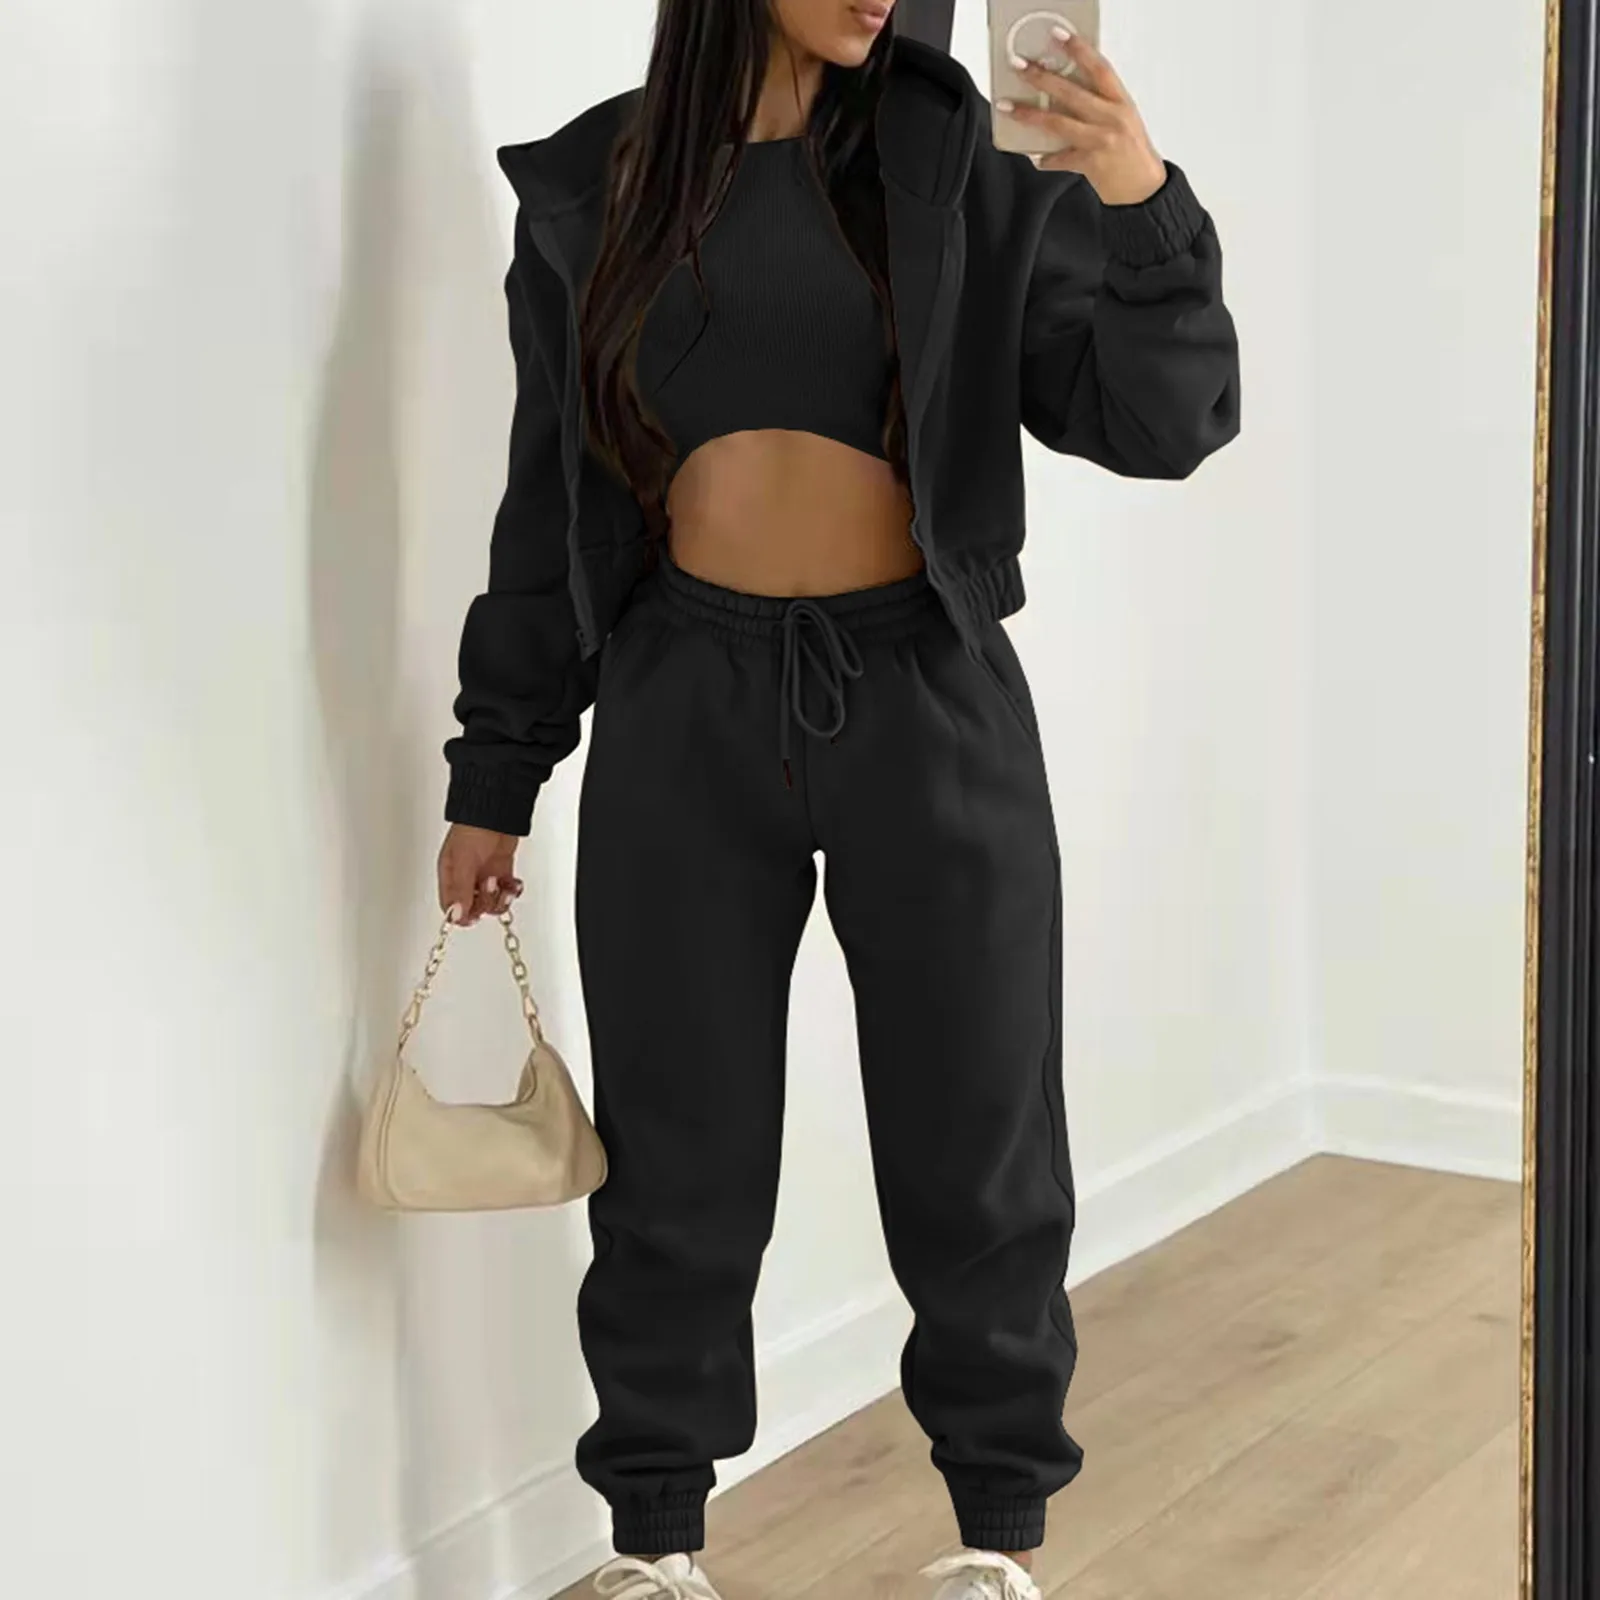 

3 Piece Set Women's Slim Fit Tracksuit Casual Spring Sporty Outfits Solid Zip Hooded Crop Tops+Vest+Pants Set Streetwear